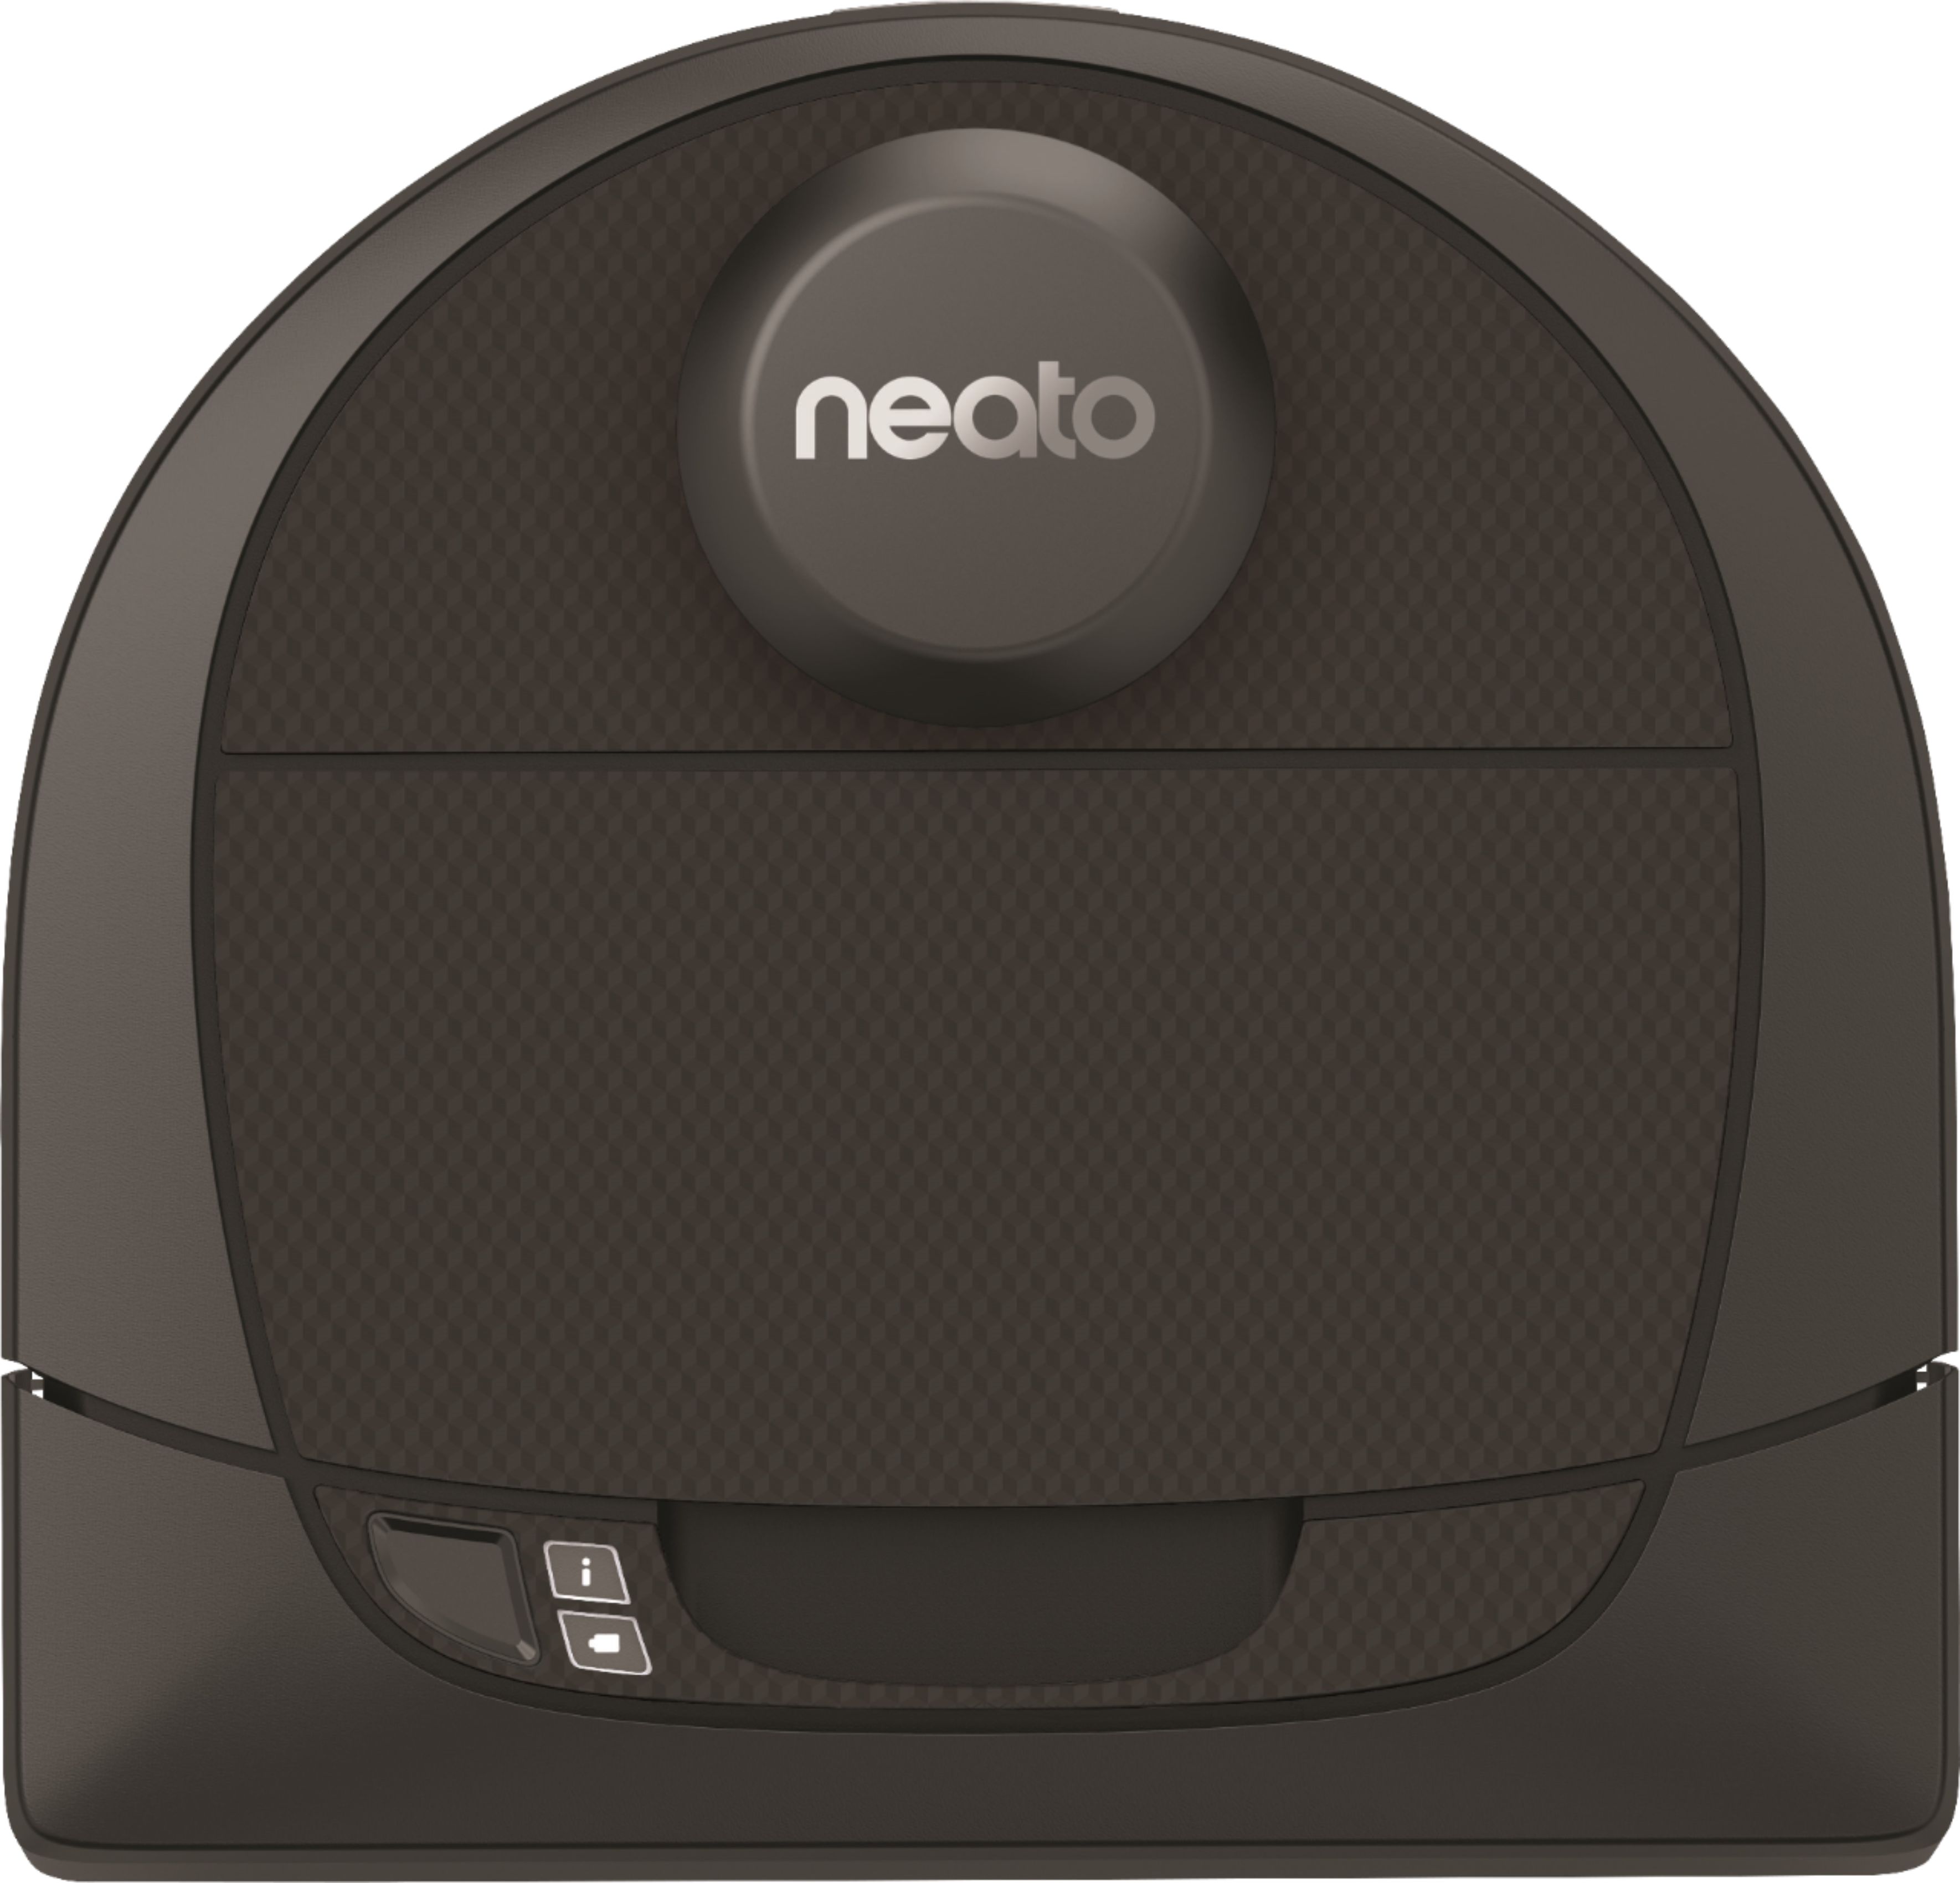 Neato Robotics - Neato Botvac D4 Connected App-Controlled Robot Vacuum - Black With Honeycomb Pattern